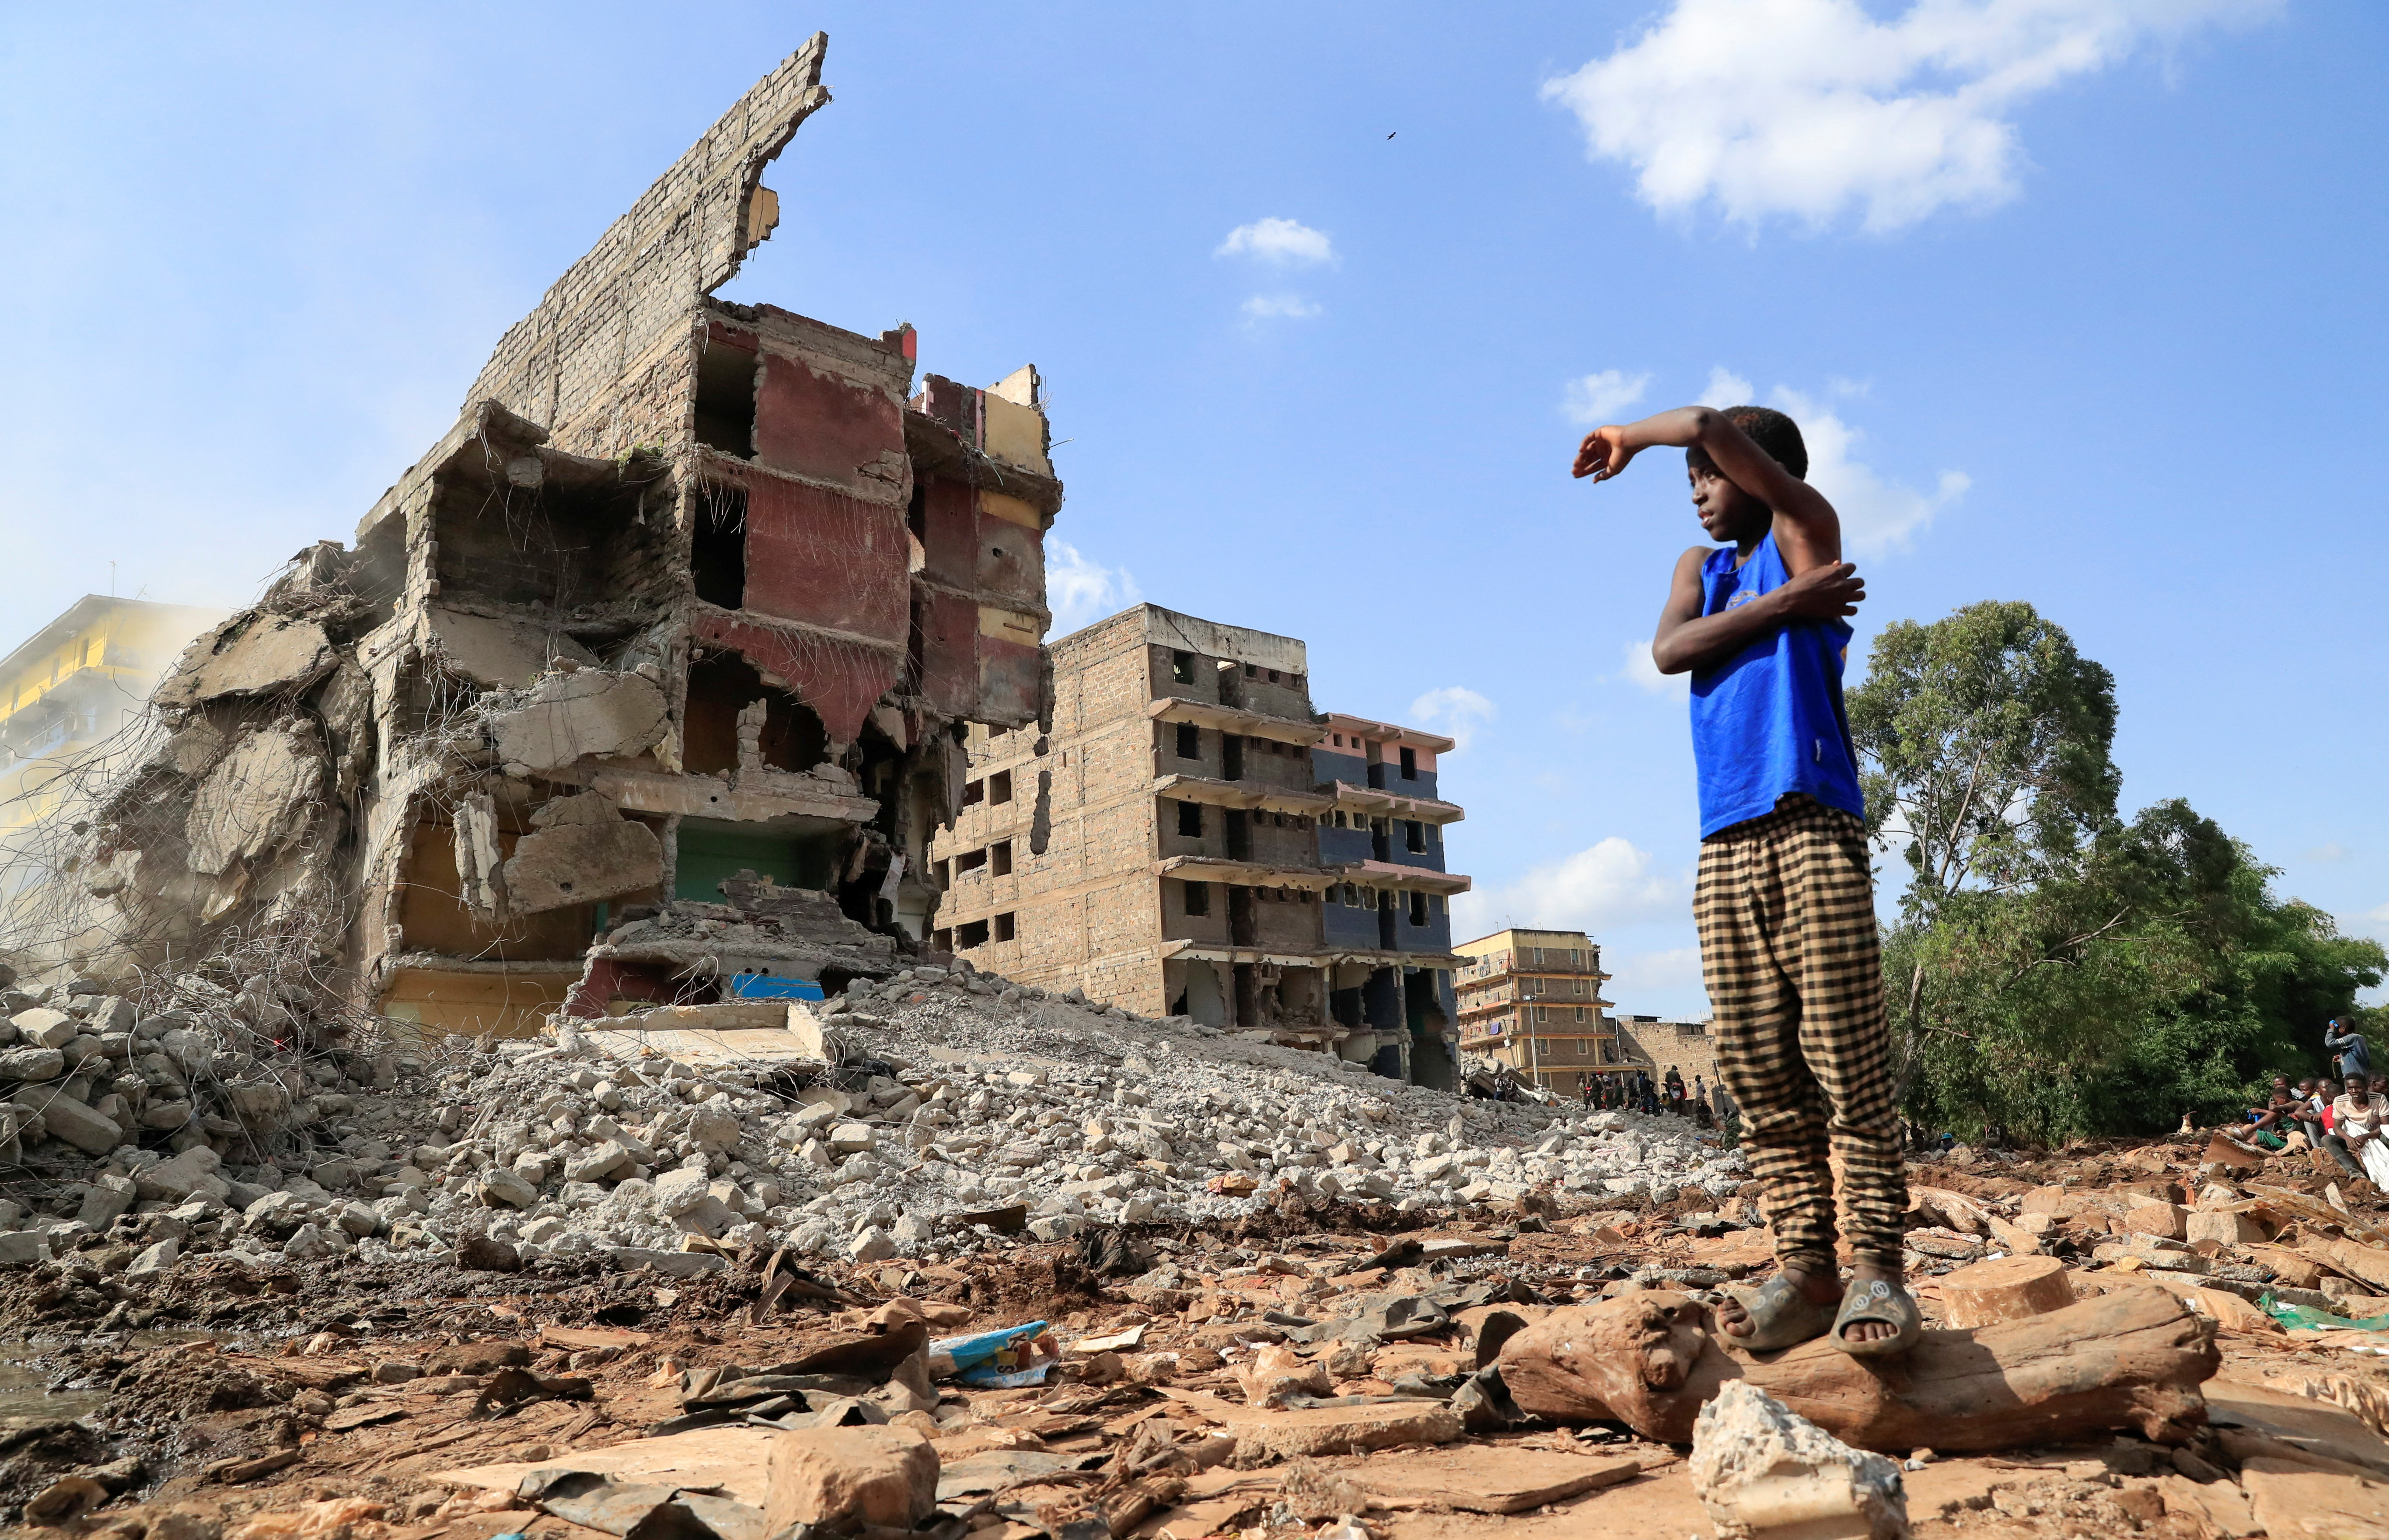 A boy looks at the search and rescue operations on the rubble of a residential flat built on riparian land, that collapsed while undergoing demolition in Nairobi